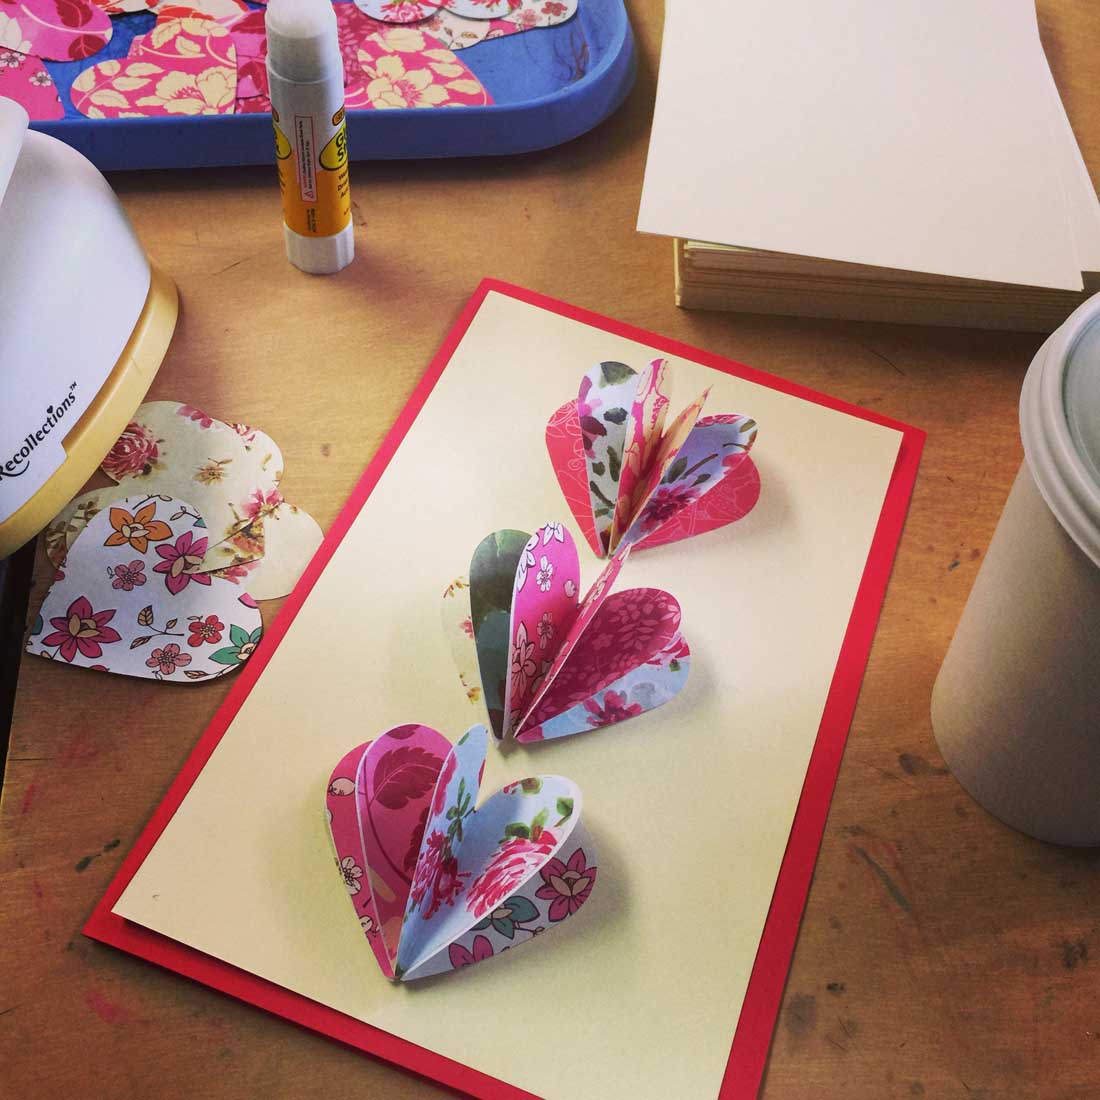 Pop Out Cards on a Budget | Art Projects for Kids | Bloglovin’